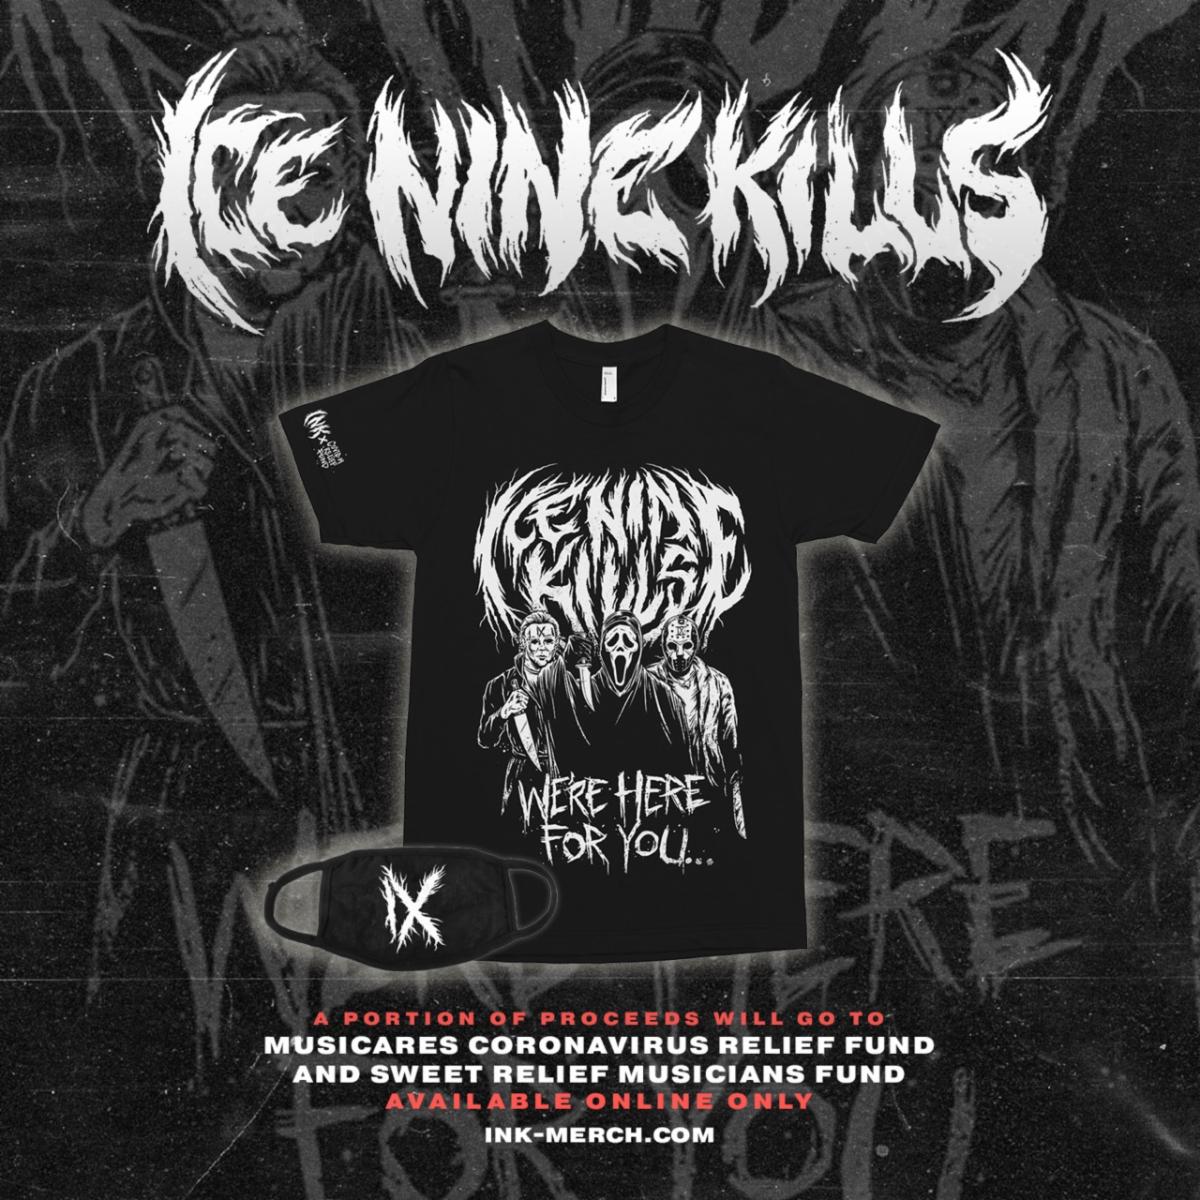 Ice Nine Kills Slash Back At Covid-19 With Special T-Shirt In Aid of Sweet Relief and Music Cares